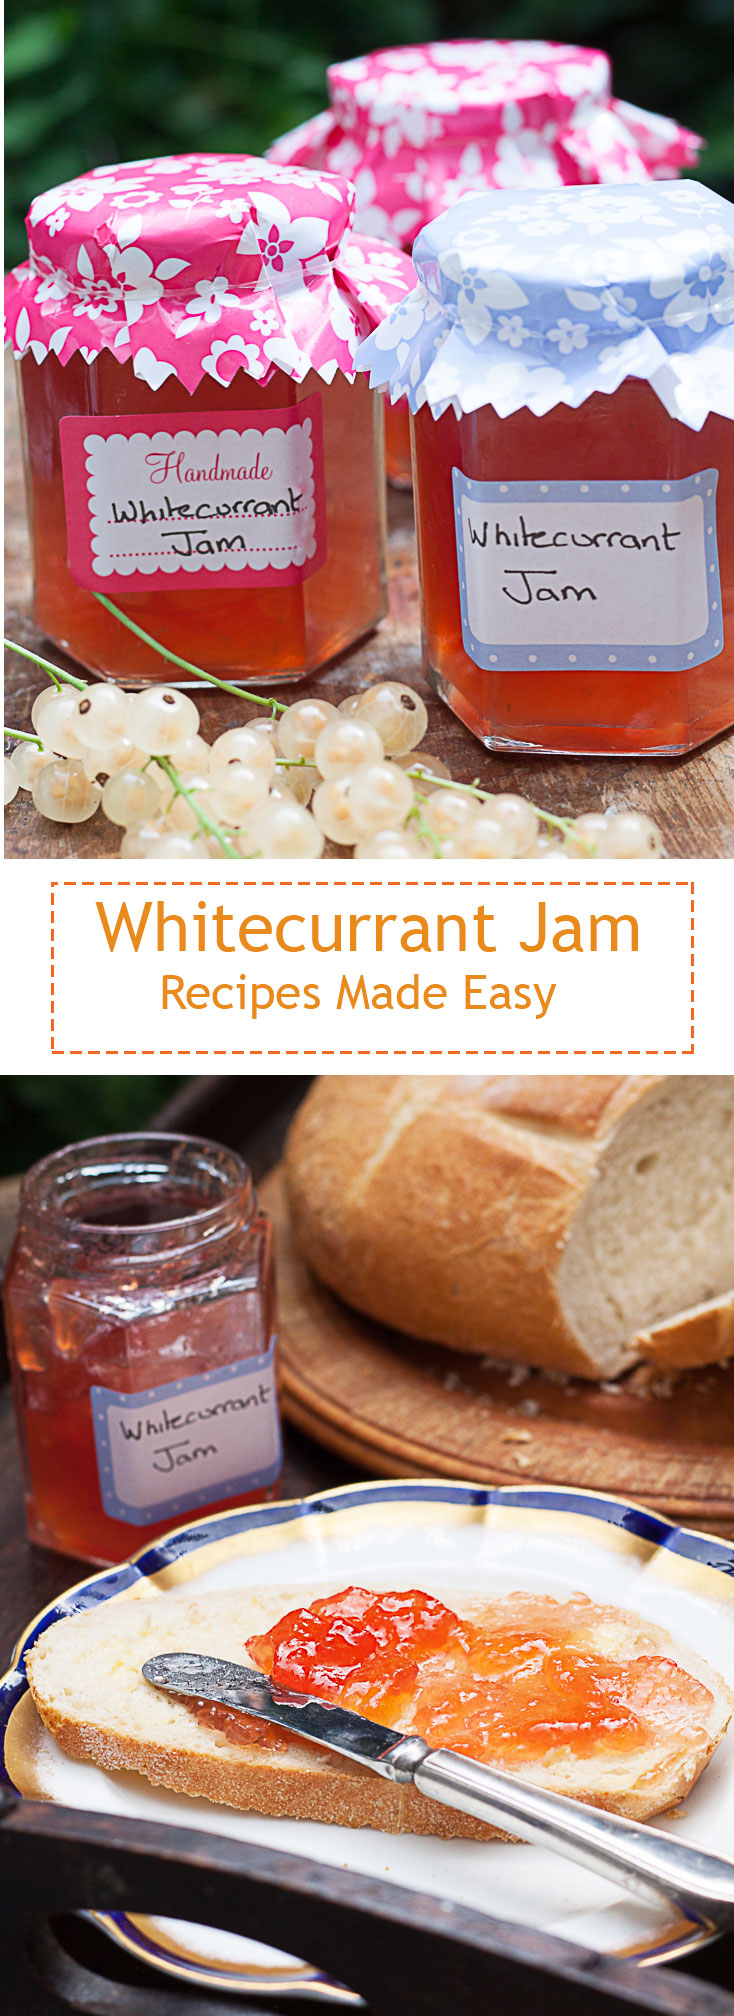 white currant jam from recipes made easy